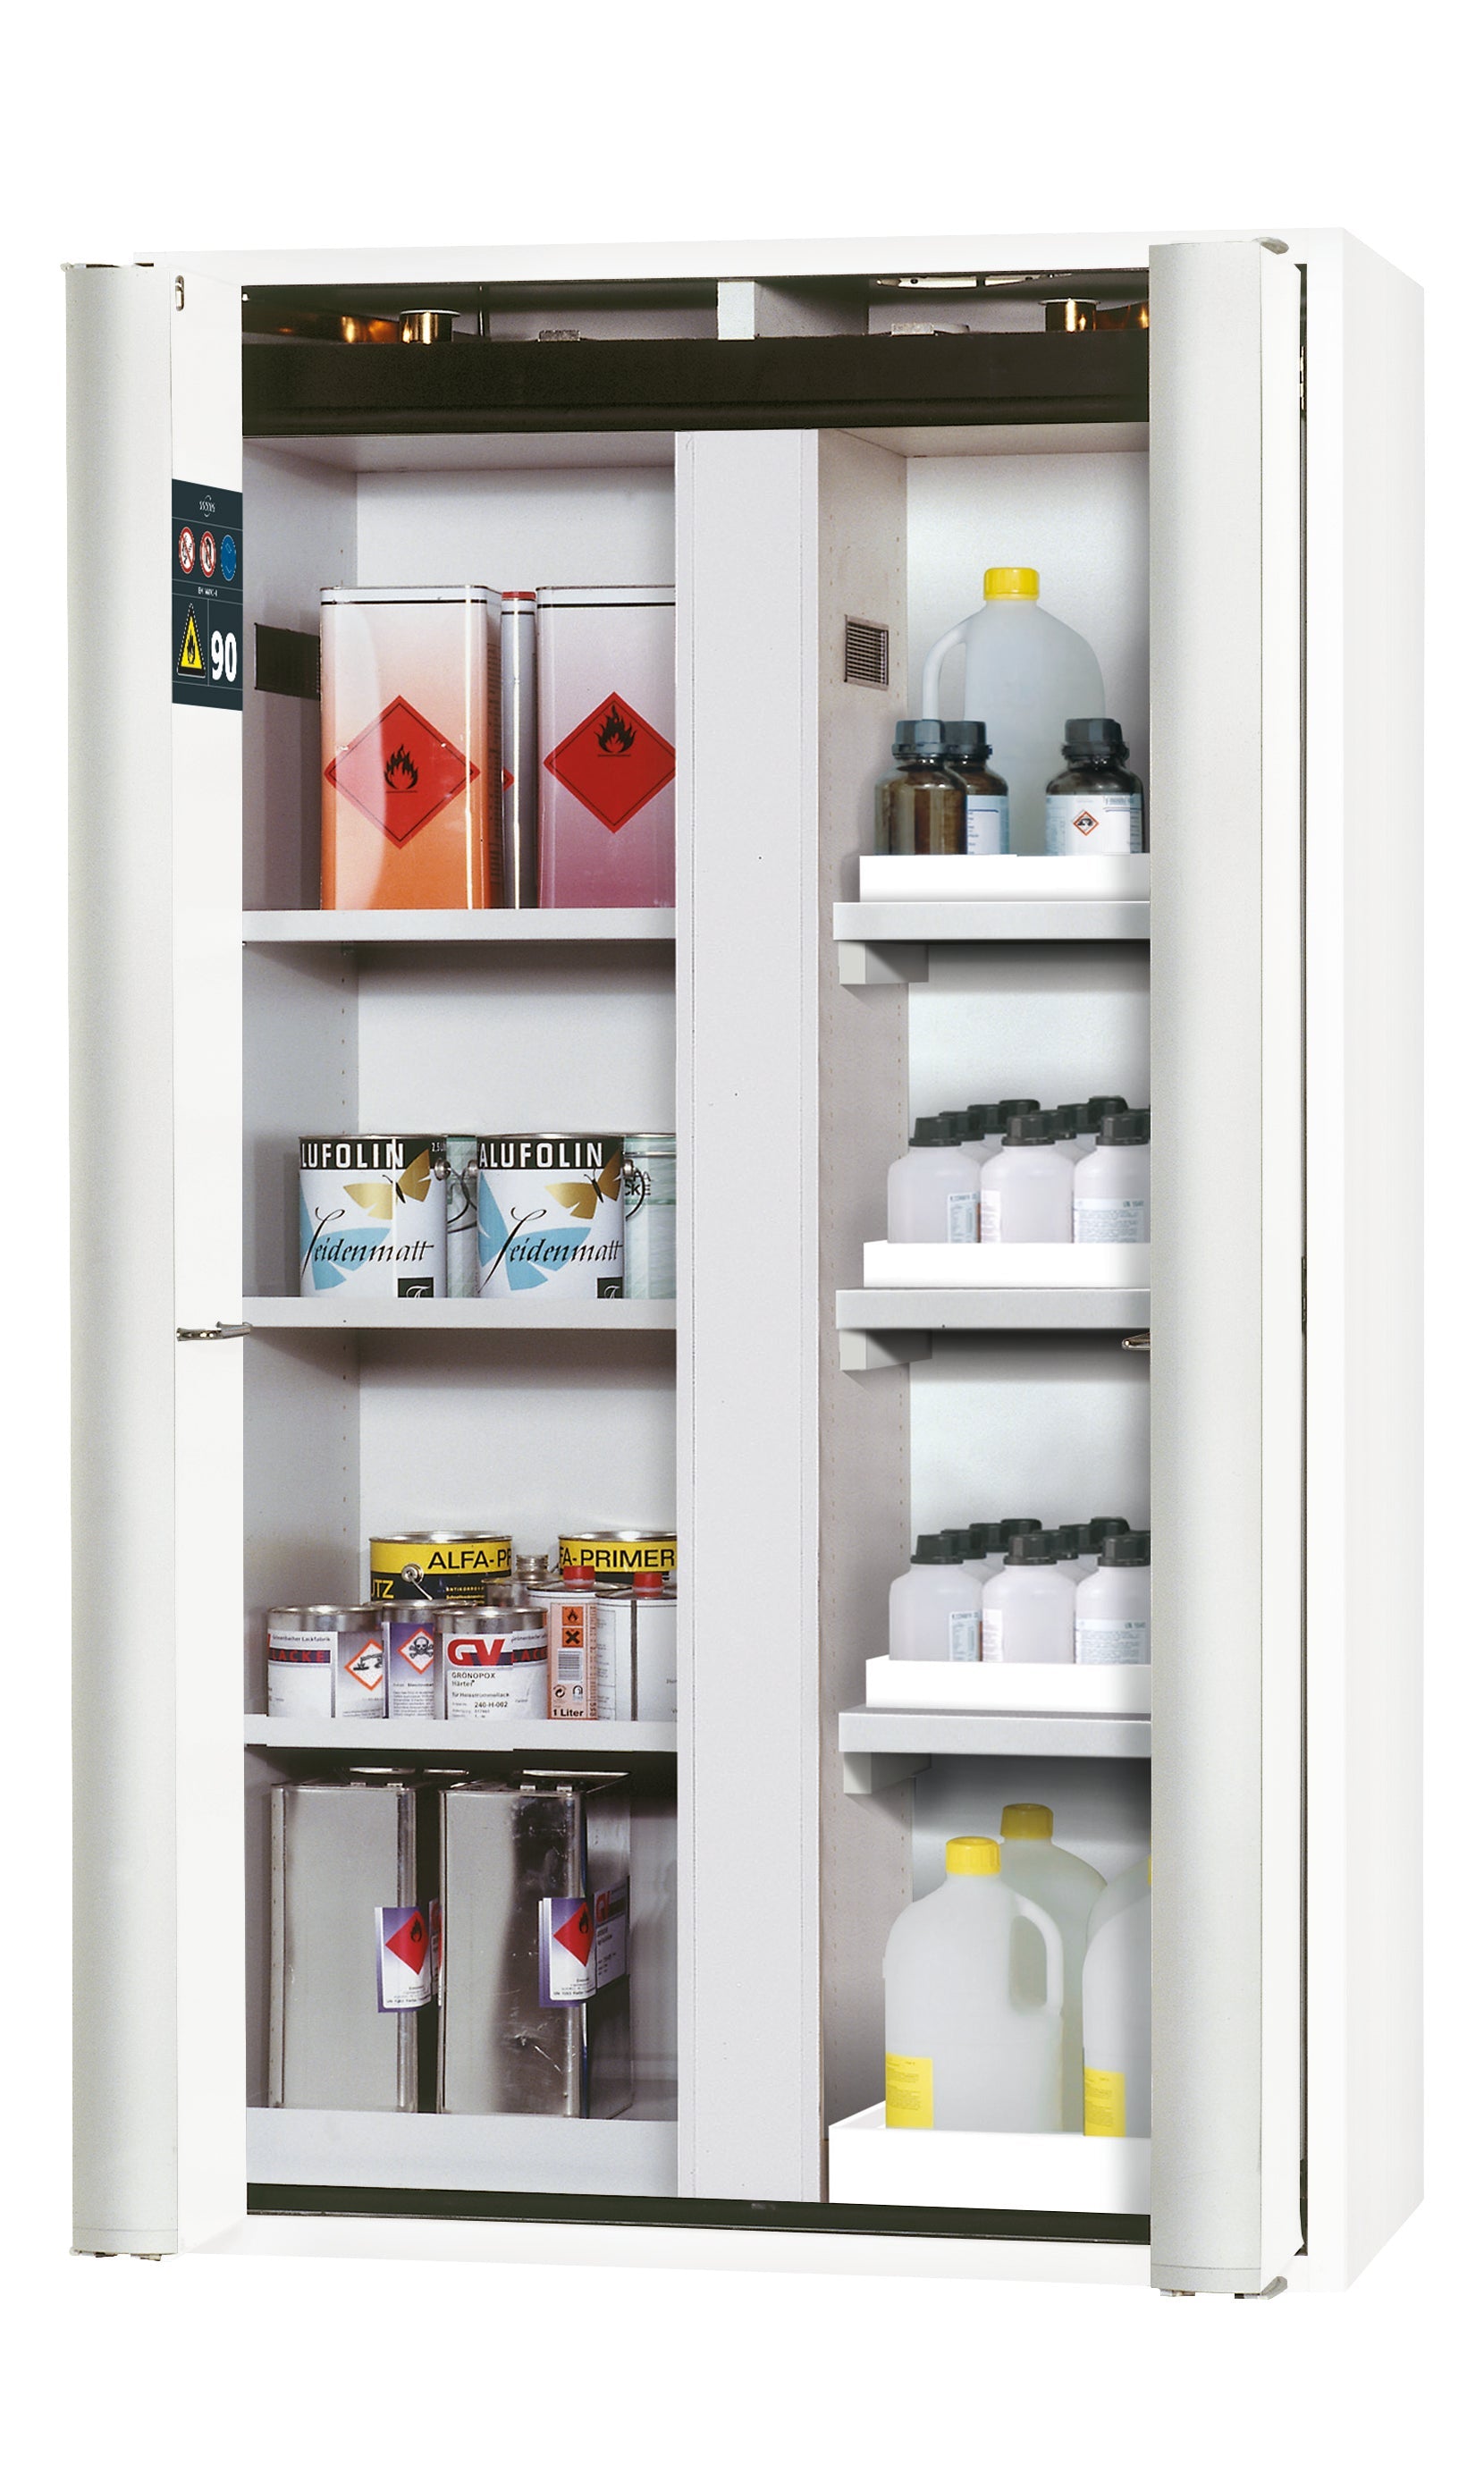 Type 90 safety cabinet S-PHOENIX-90 model S90.196.120.MV.FDAS in laboratory white (similar to RAL 9016) with 3x standard shelves (sheet steel)